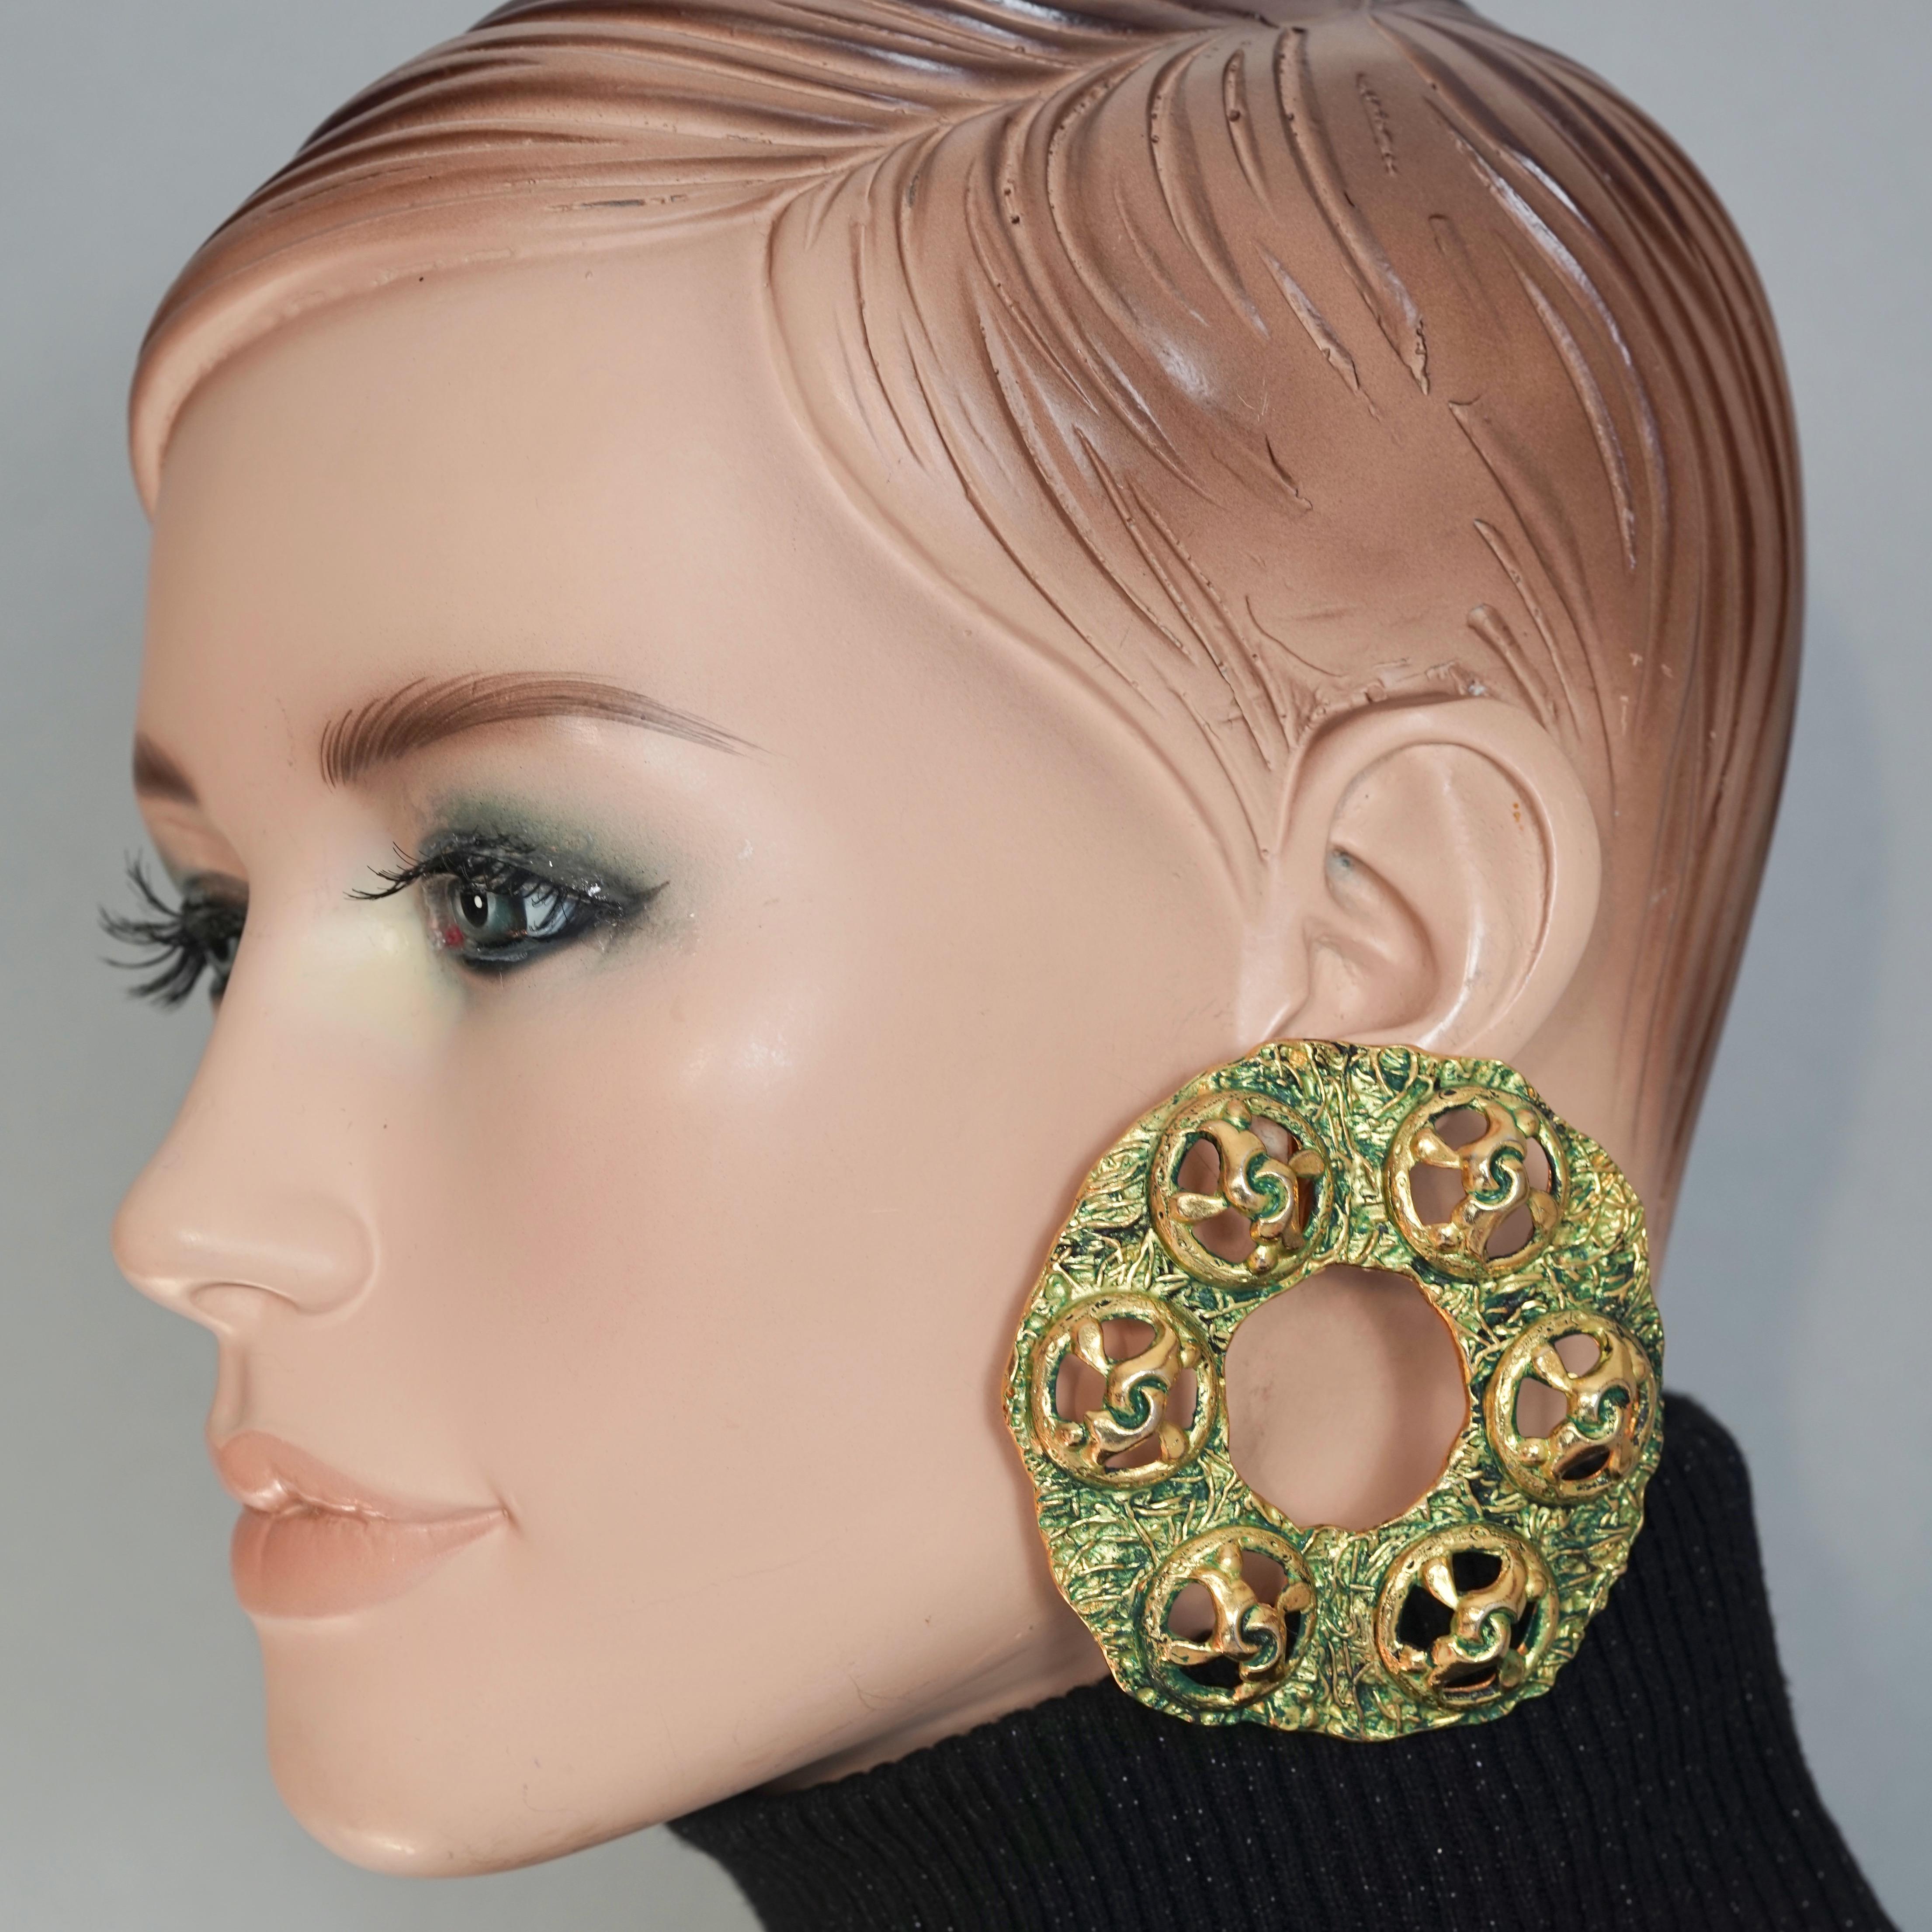 Vintage Massive French Patina Green Enamel Creole Hoop Earrings

Measurements:
Height: 2.75 inches (7 inches)
Width: 2.75 inches (7 inches)
Weight per Earrings: 50 grams

Features:
- Massive textured hoop/ creole earrings.
- Green enamel patina